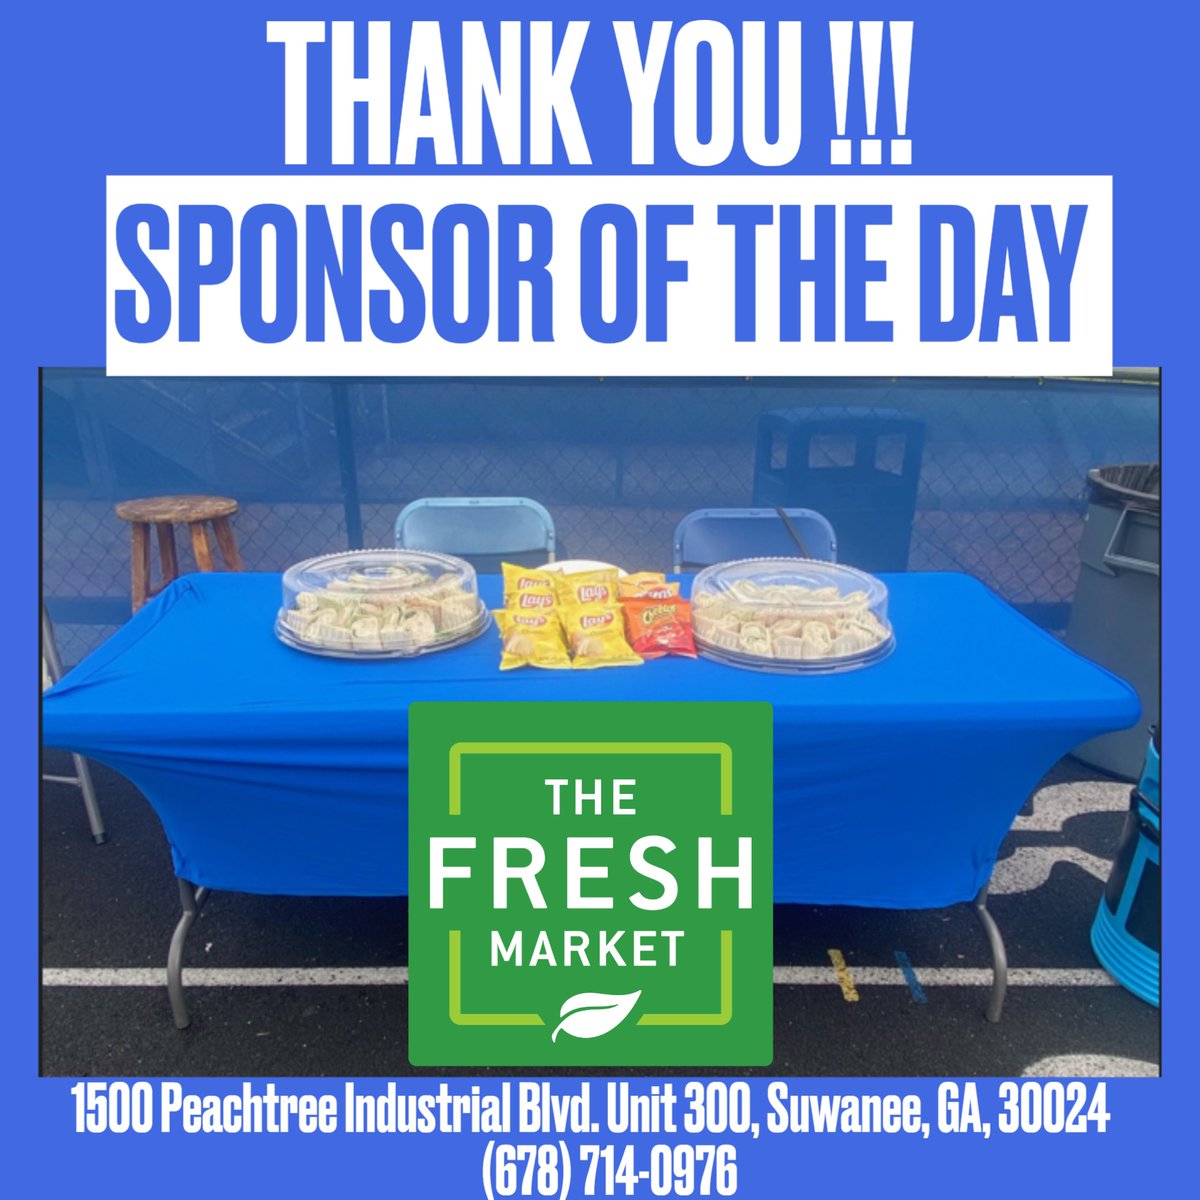 HUGE shout out to @TheFreshMarket for providing Wraps to the College Coaches that stopped by Practice last night!!! #ThankYou #FindAWay #CoachesStopBy #RecruitTheRidge